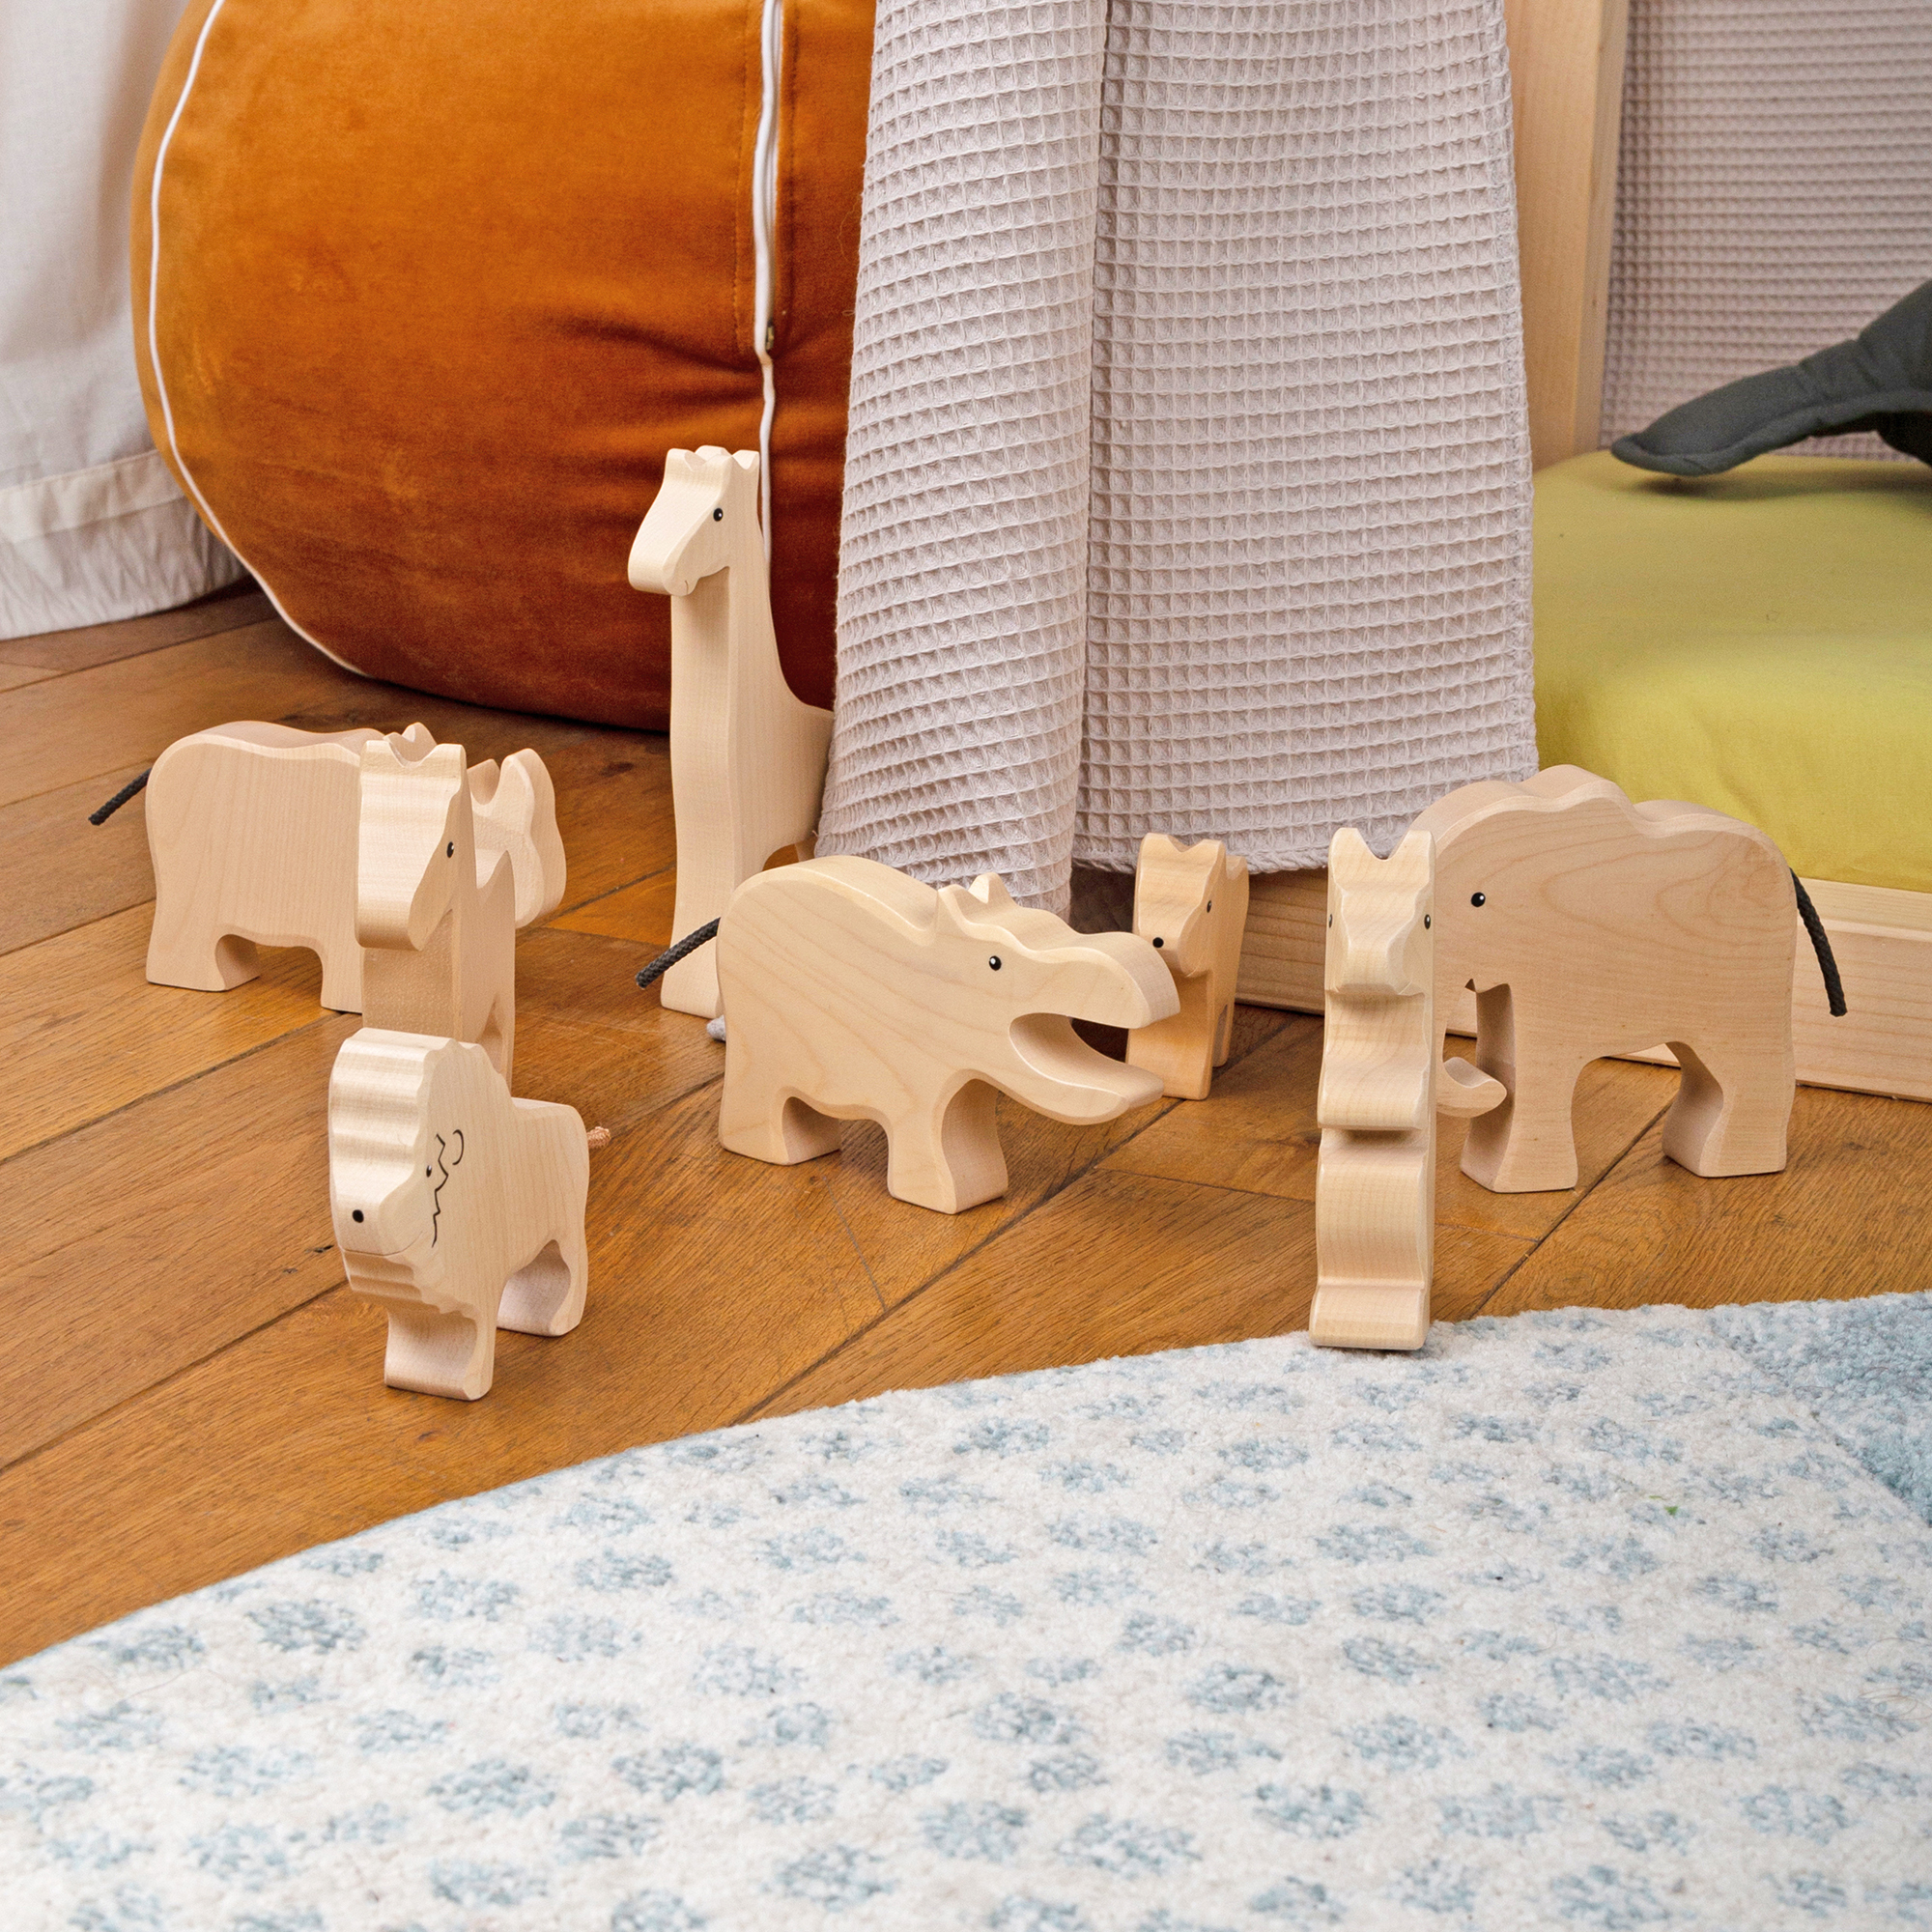 Wooden toy set of 8 zoo animals